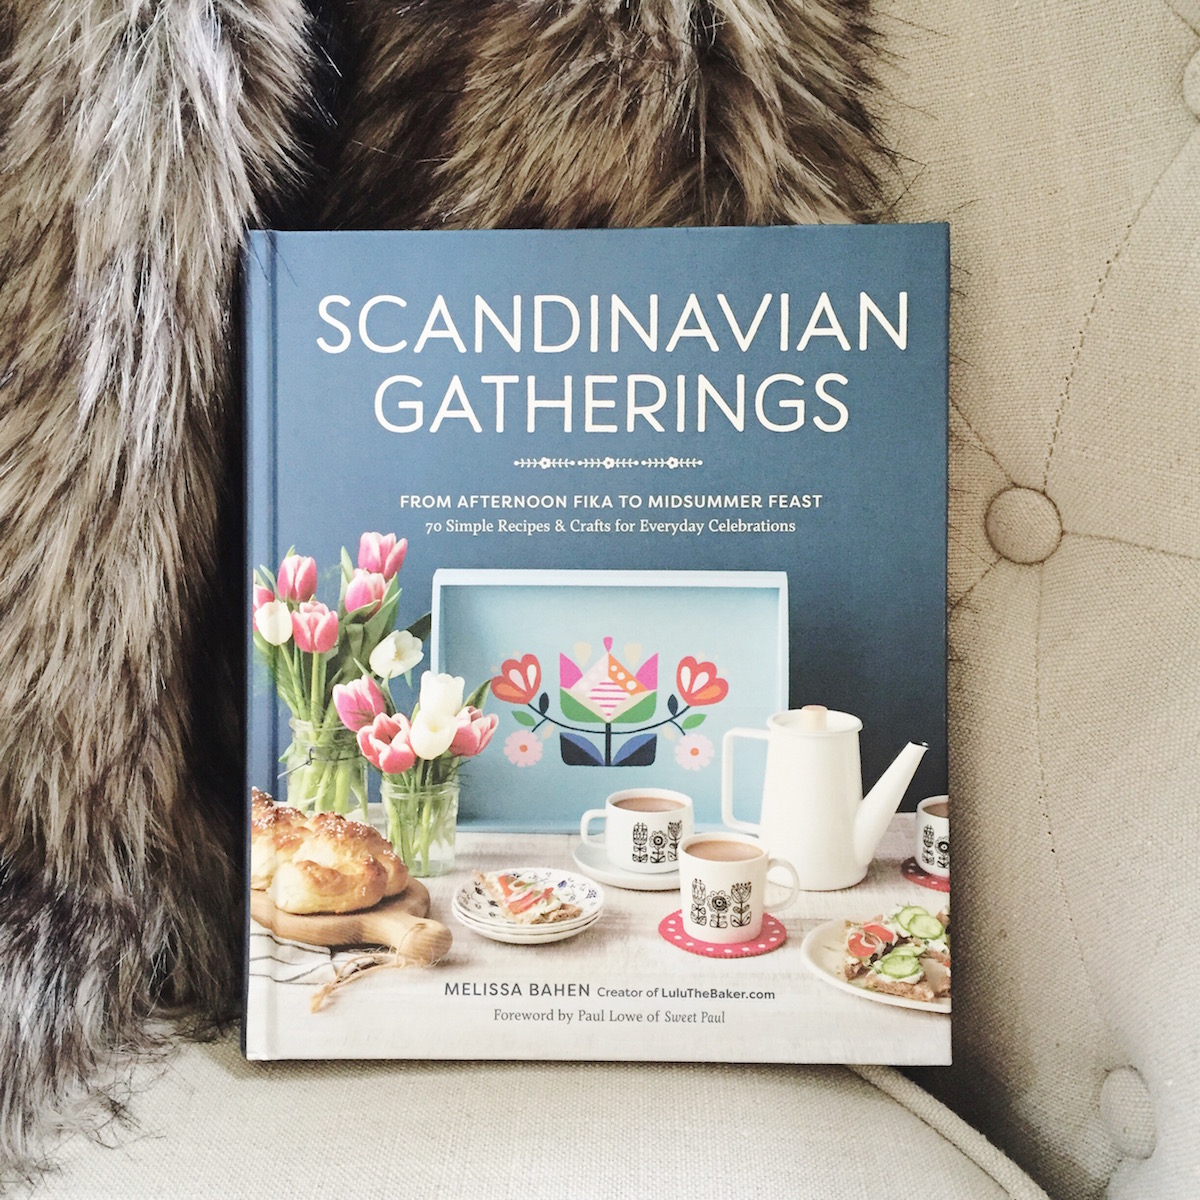 Scandinavian Gatherings: From Afternoon Fika to Midsummer Feast: 70 Simple Recipes & Crafts for Everyday Celebrations | Available Now!